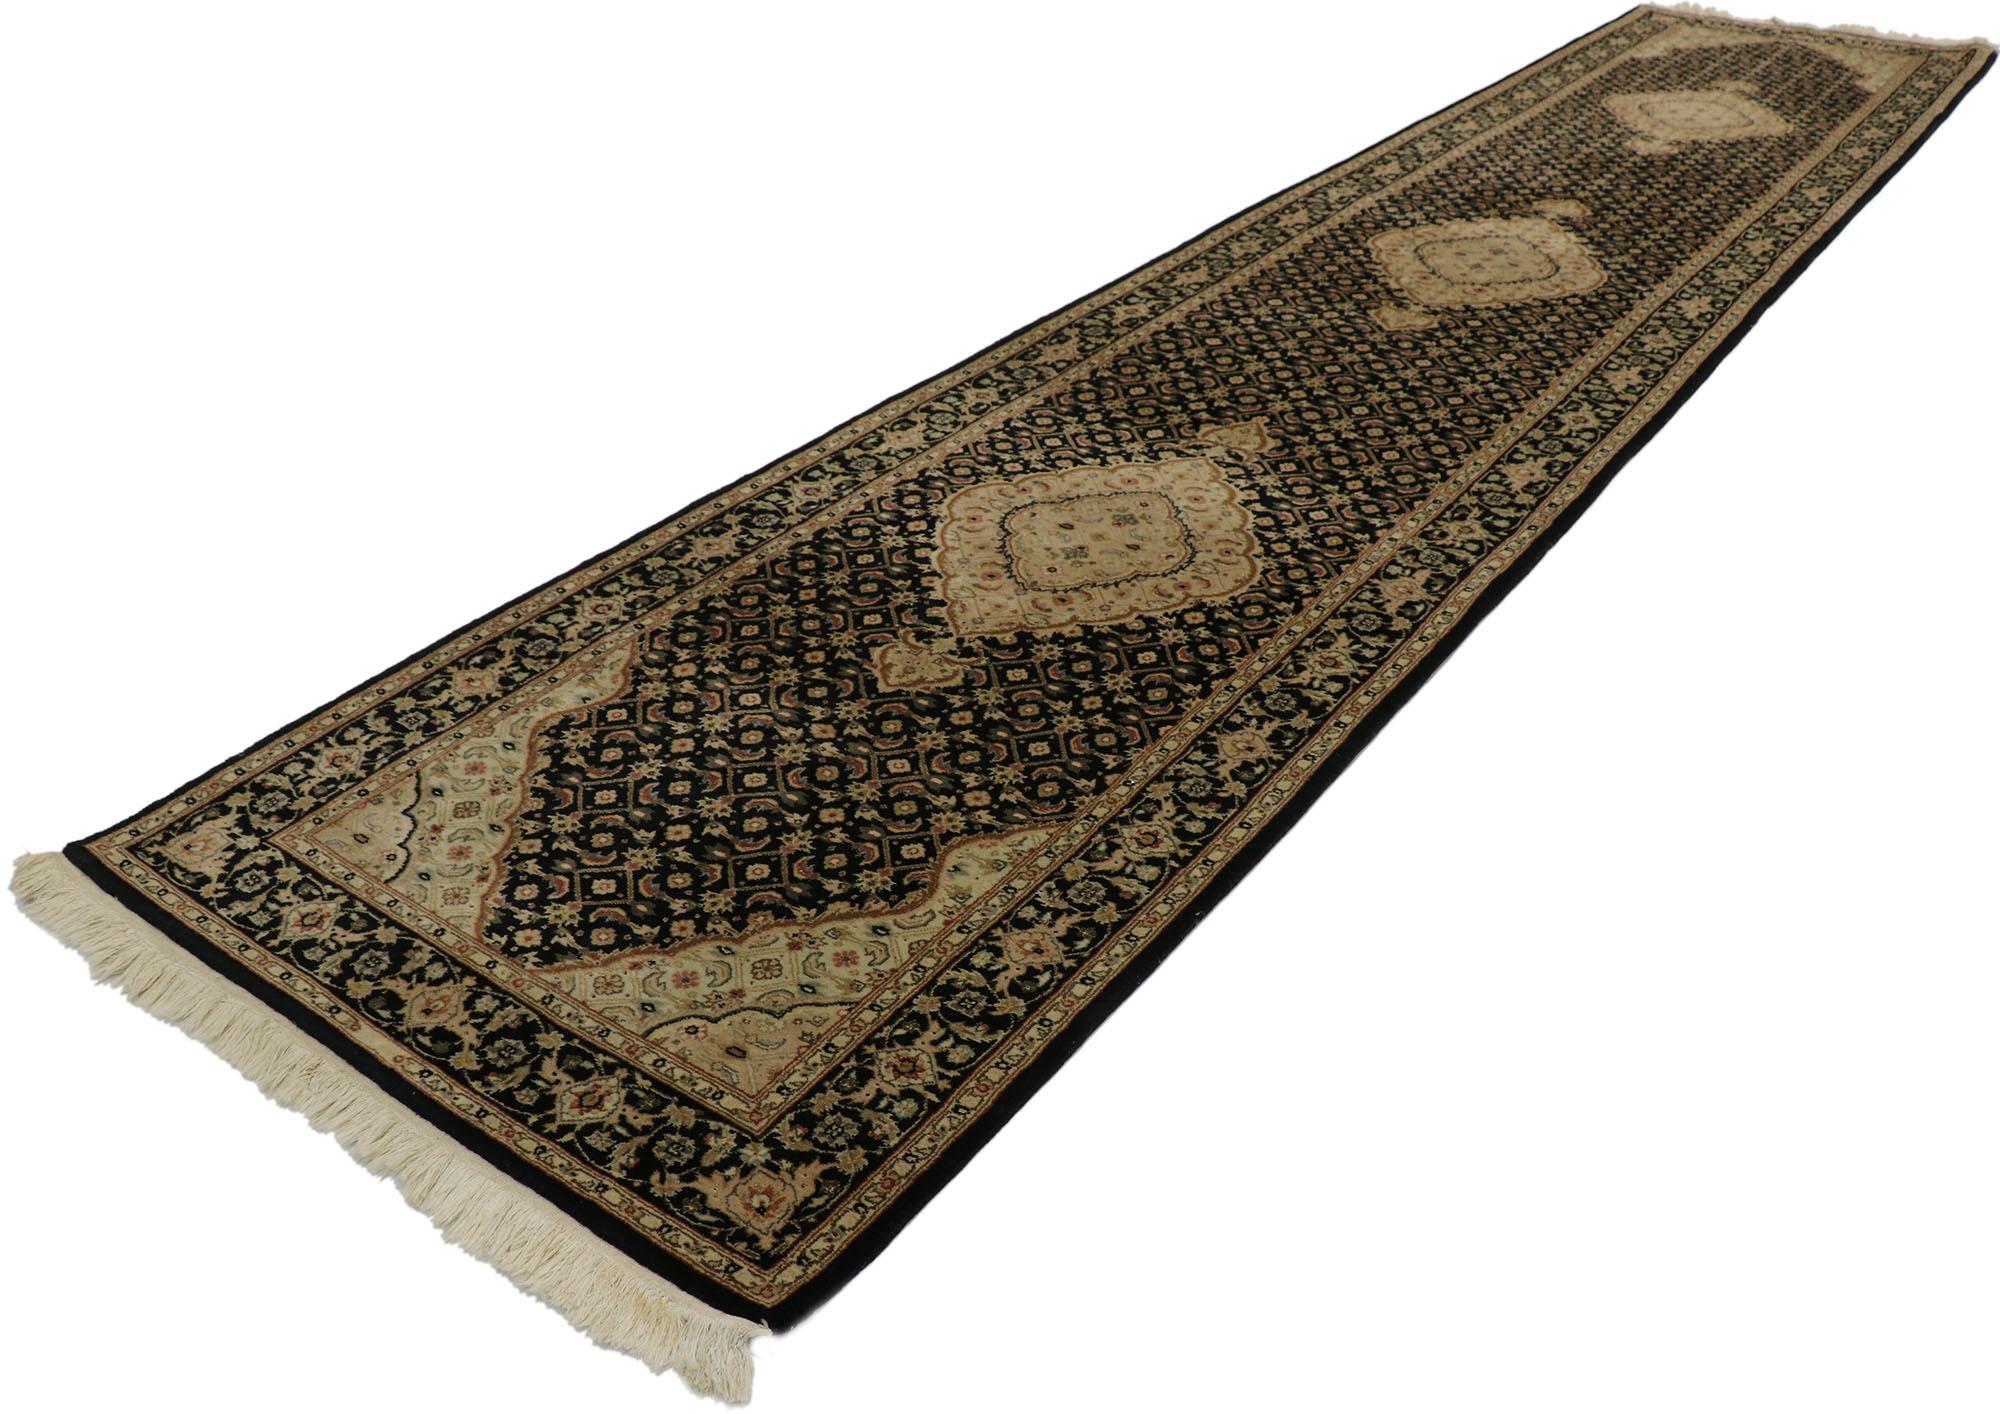 77545 Vintage Persian Tabriz Style Indian Runner 03'00 x 15'00. This hand knotted wool vintage Persian style runner features three scalloped diamond-shaped medallions with palmette pendants floating on an abrashed field. The medallions, field, and